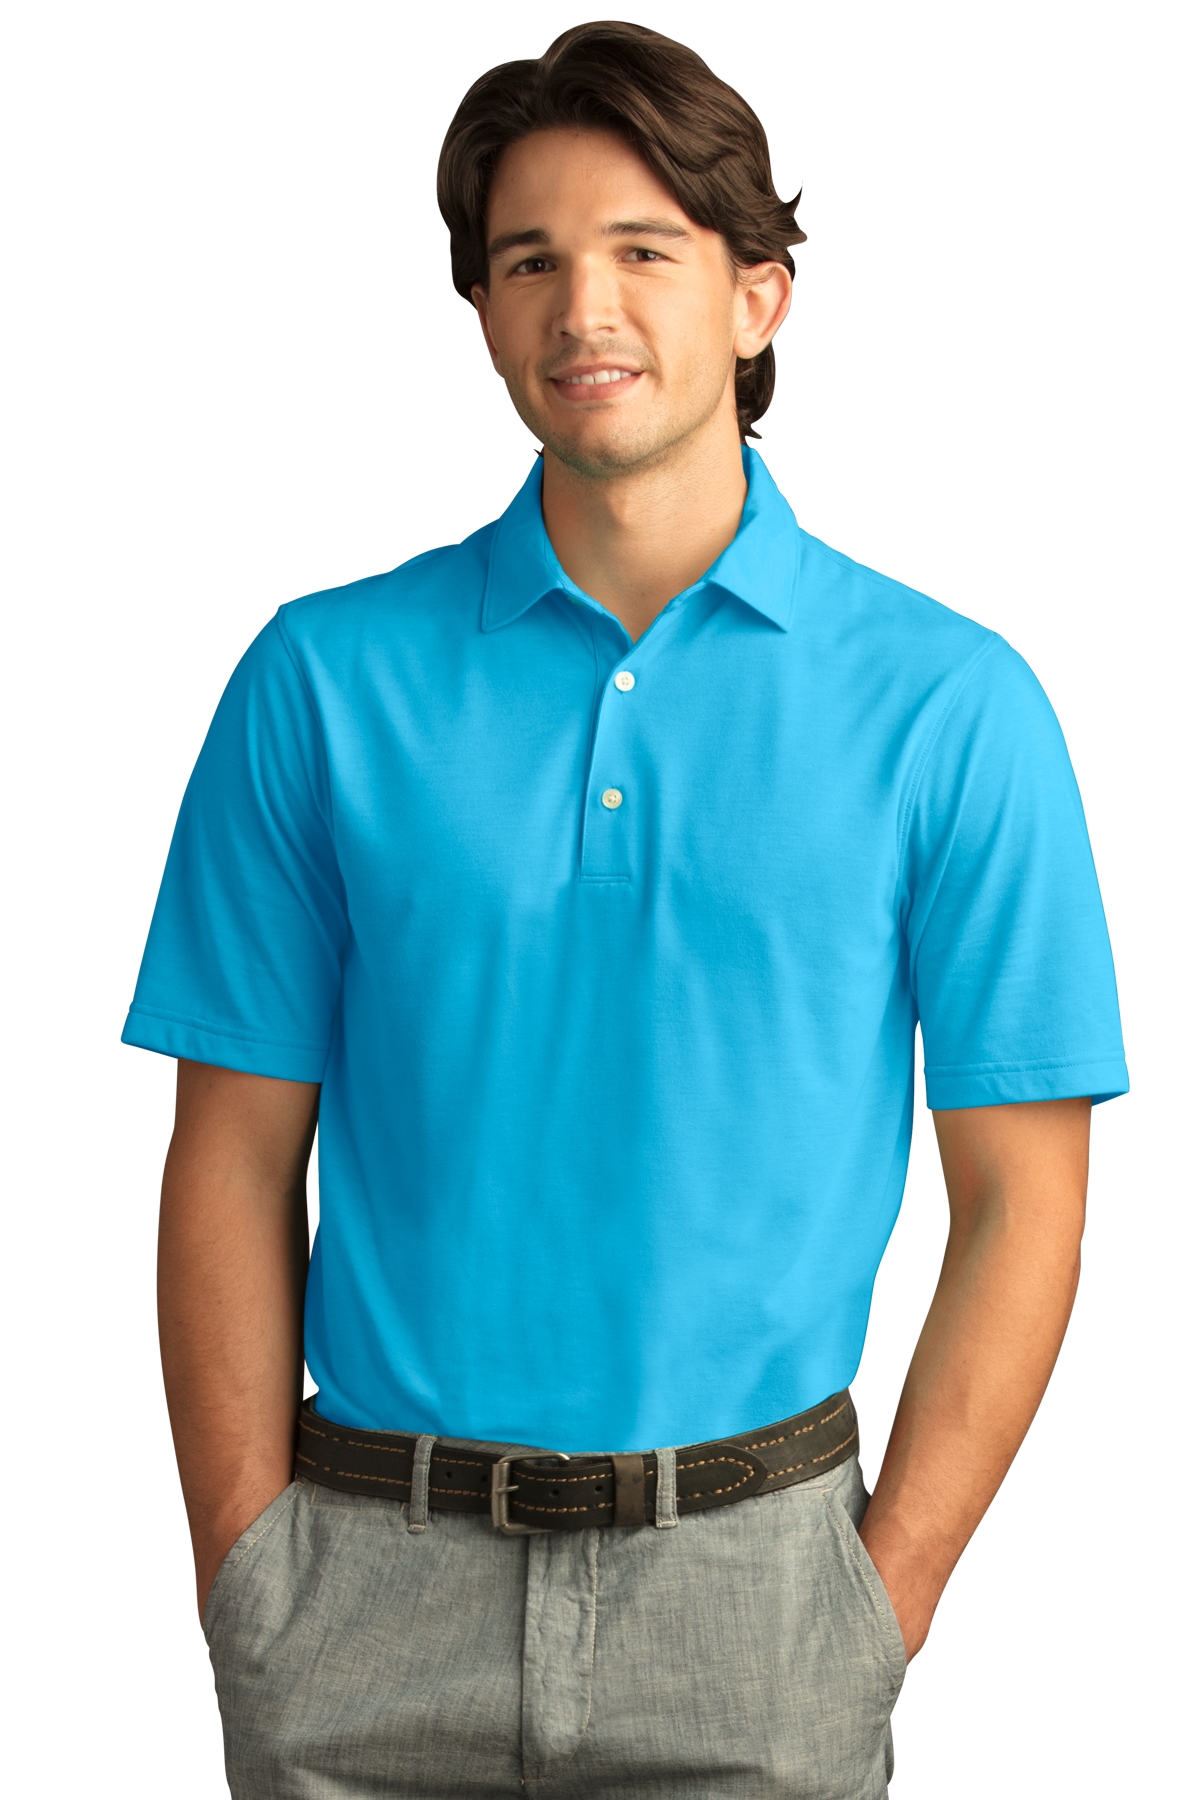 Greg Norman GNS8K463 - Men's Play Dry Foreward Series Polo